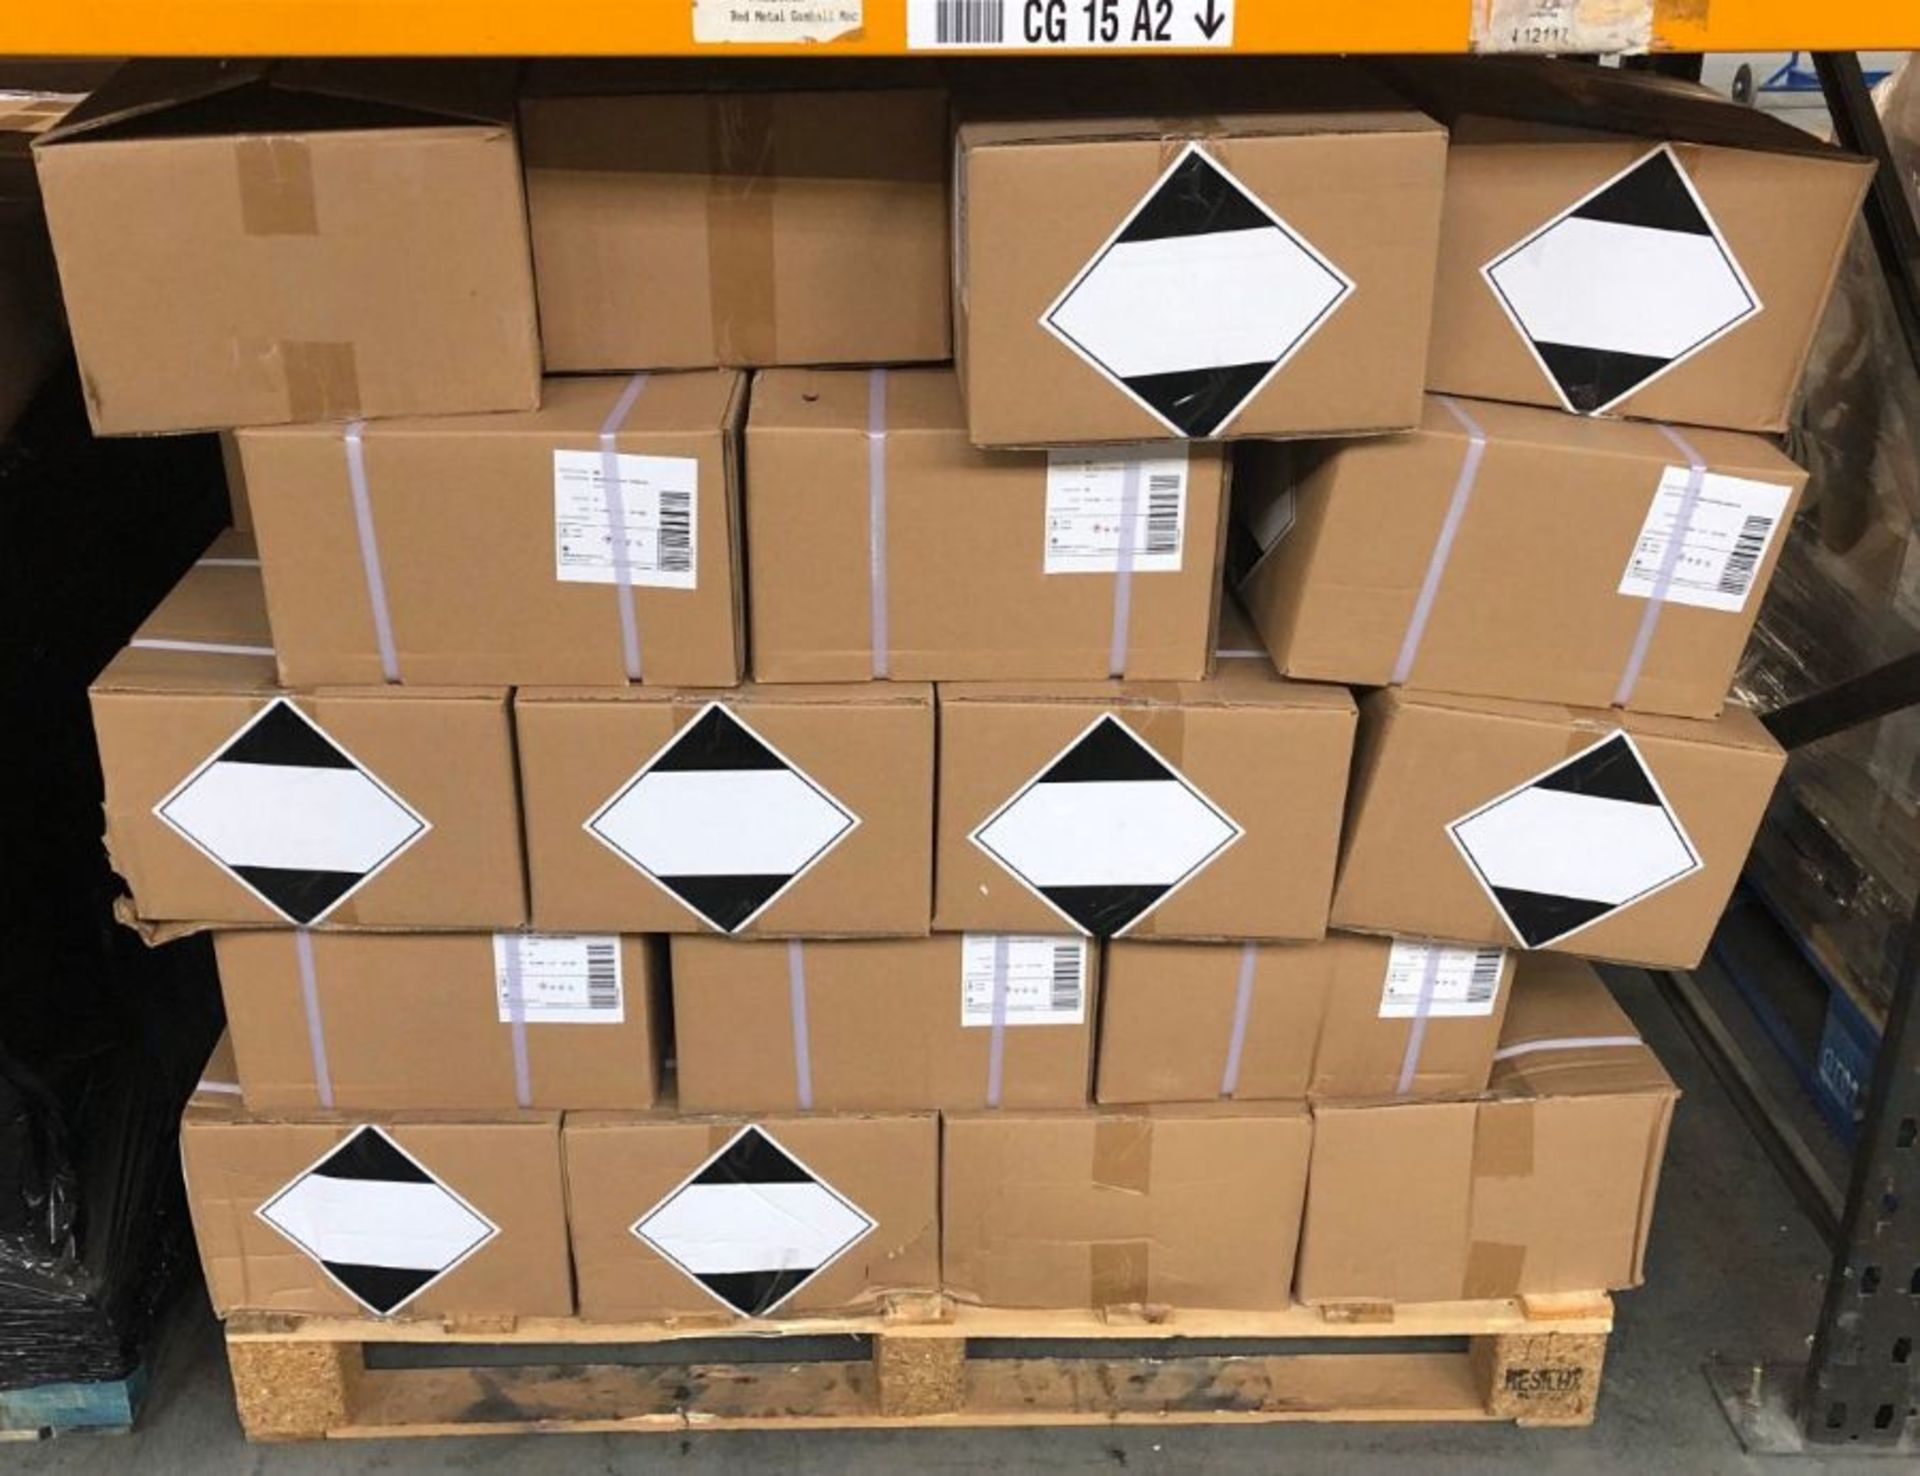 1 X BULK PALLET TO CONTAIN 44 X BOXES OF RELISAN ALCOHOL HAND GEL / 20 X 500ml BOTTLES PER BOX /